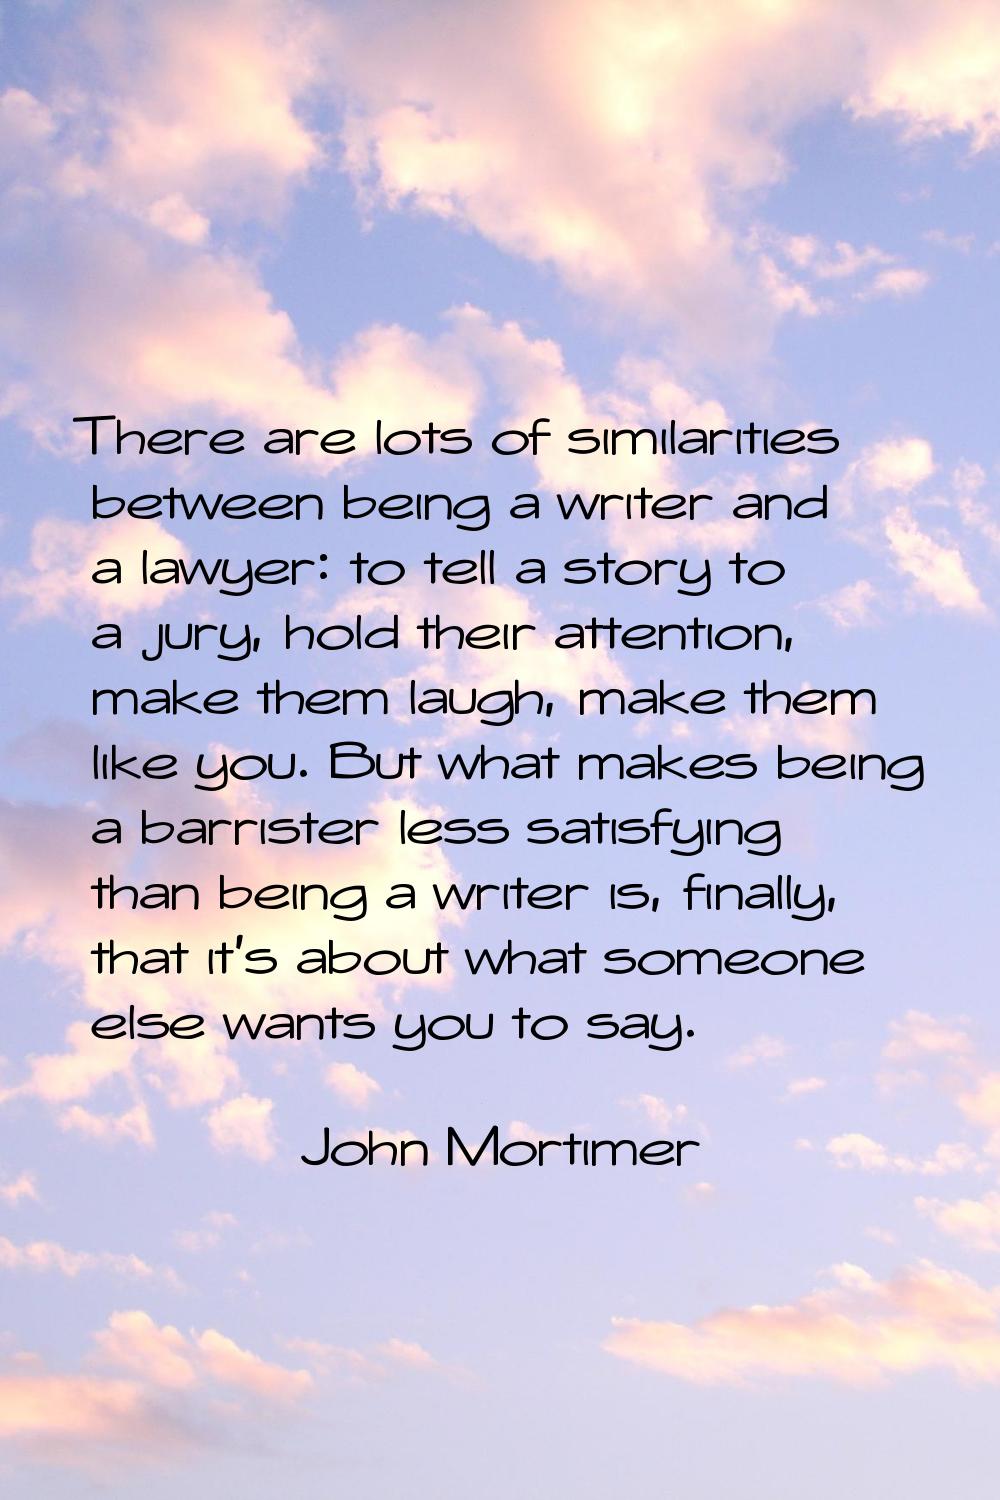 There are lots of similarities between being a writer and a lawyer: to tell a story to a jury, hold